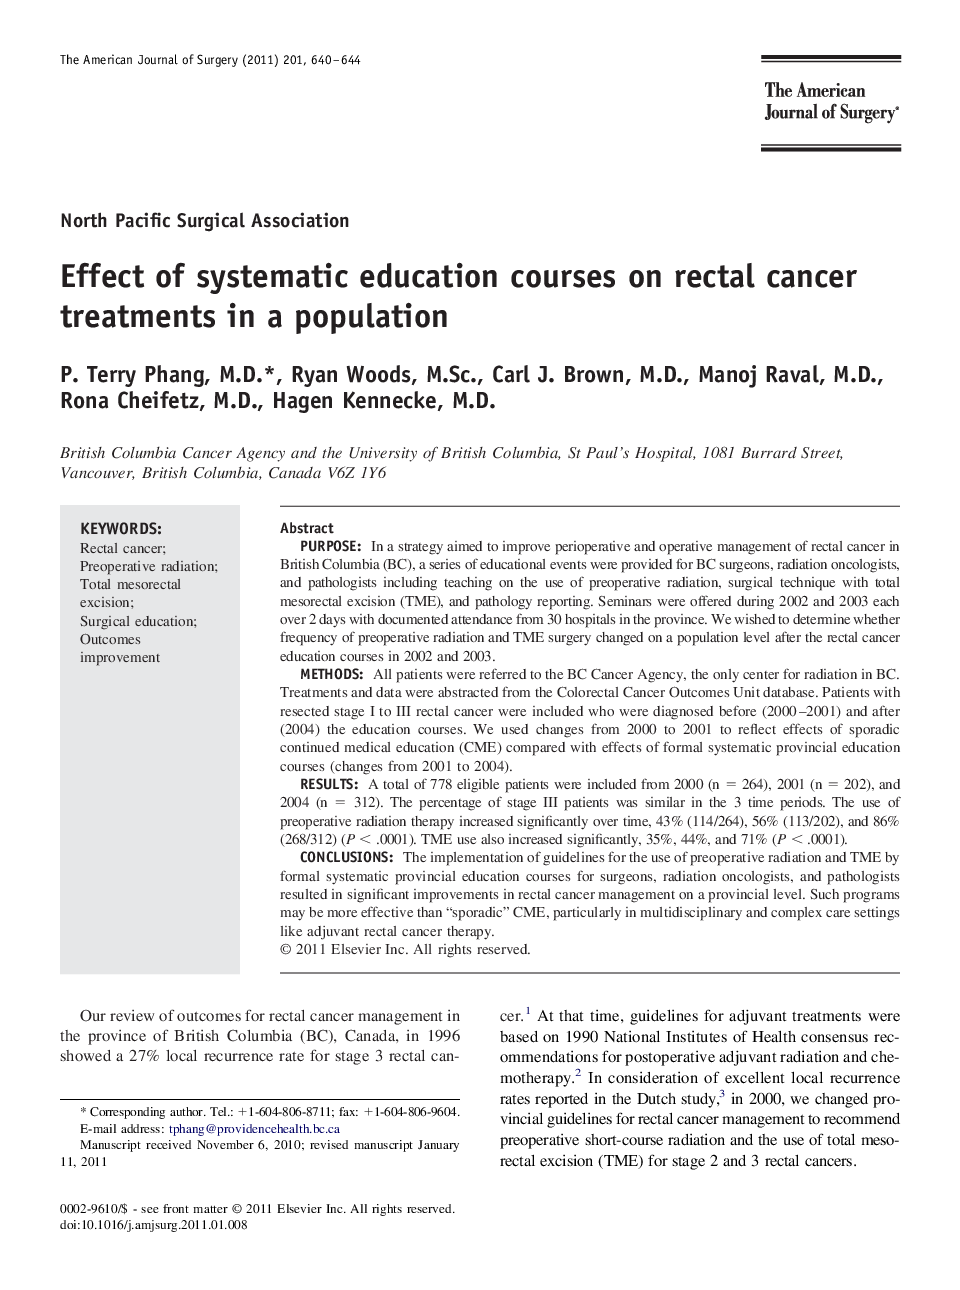 Effect of systematic education courses on rectal cancer treatments in a population